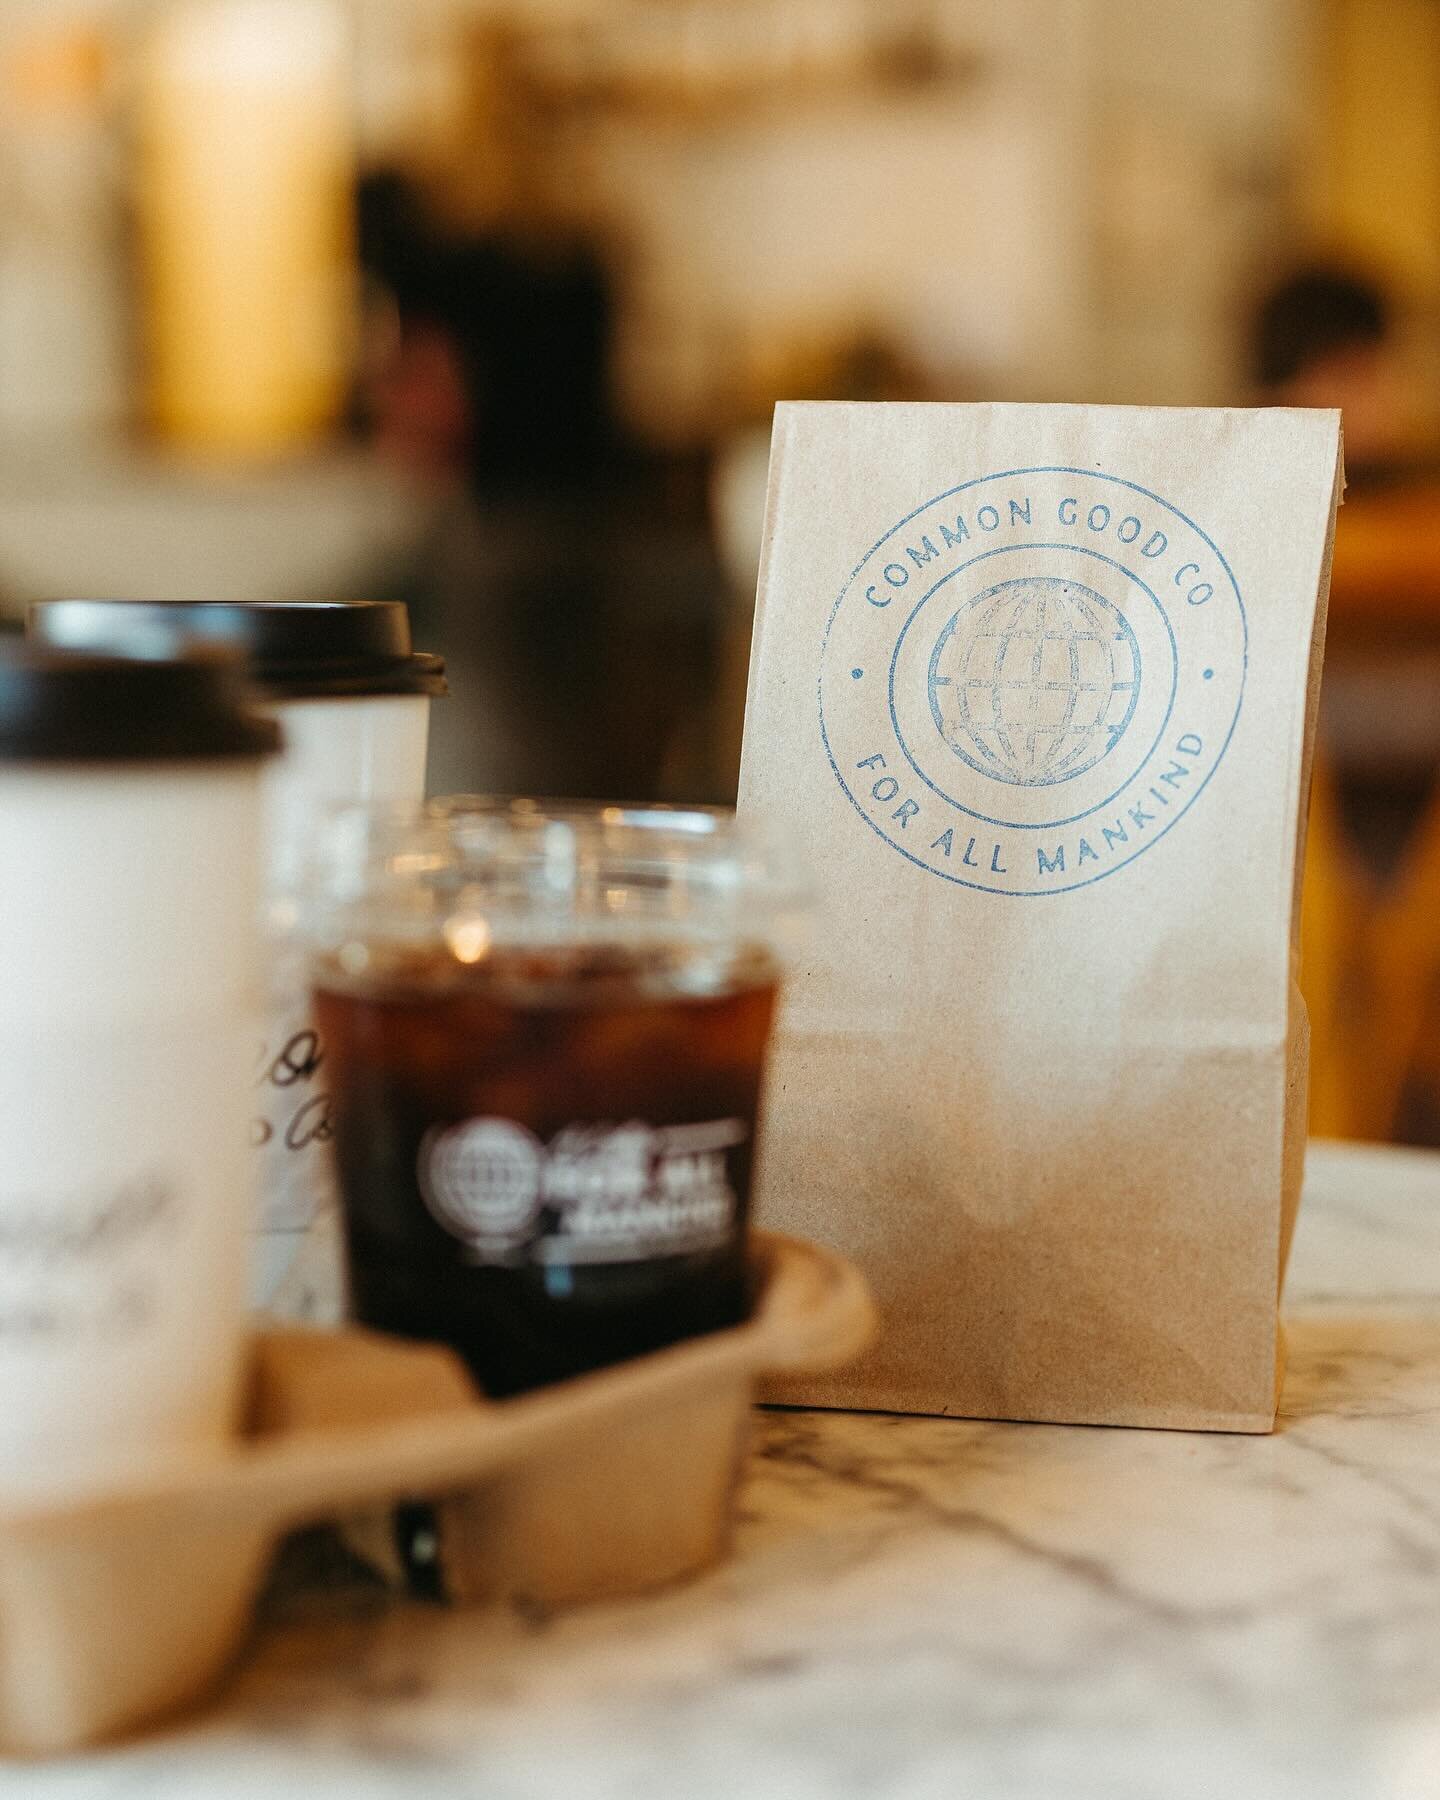 Weekends 🤝 Coffee shops.

Slowing down for a stroll down Moody Street for coffee is the perfect weekend ritual. ☕️

______________
#coffee #coffeeshop #weekendvibes #coffeetime #waltham #moodystreet #coffeewithacause #coffeelover #coffeeshopsofbosto